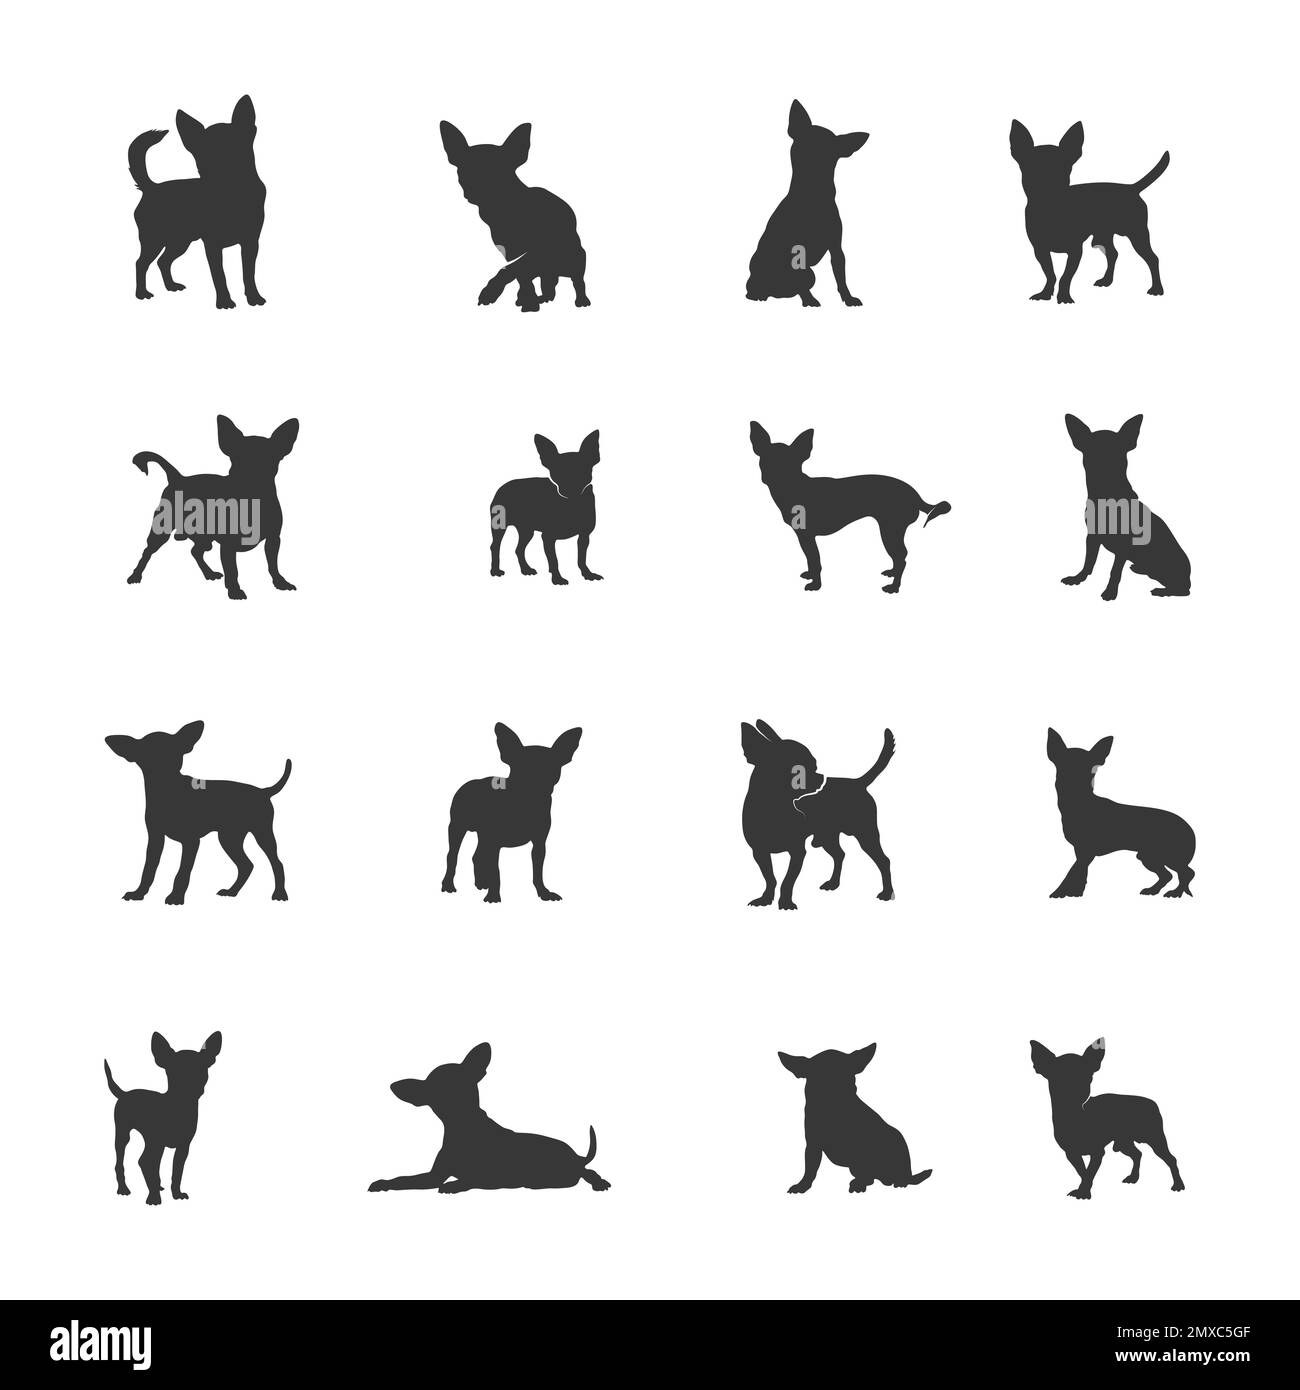 Chihuahua dog silhouettes, Chihuahua dog silhouette set Stock Vector